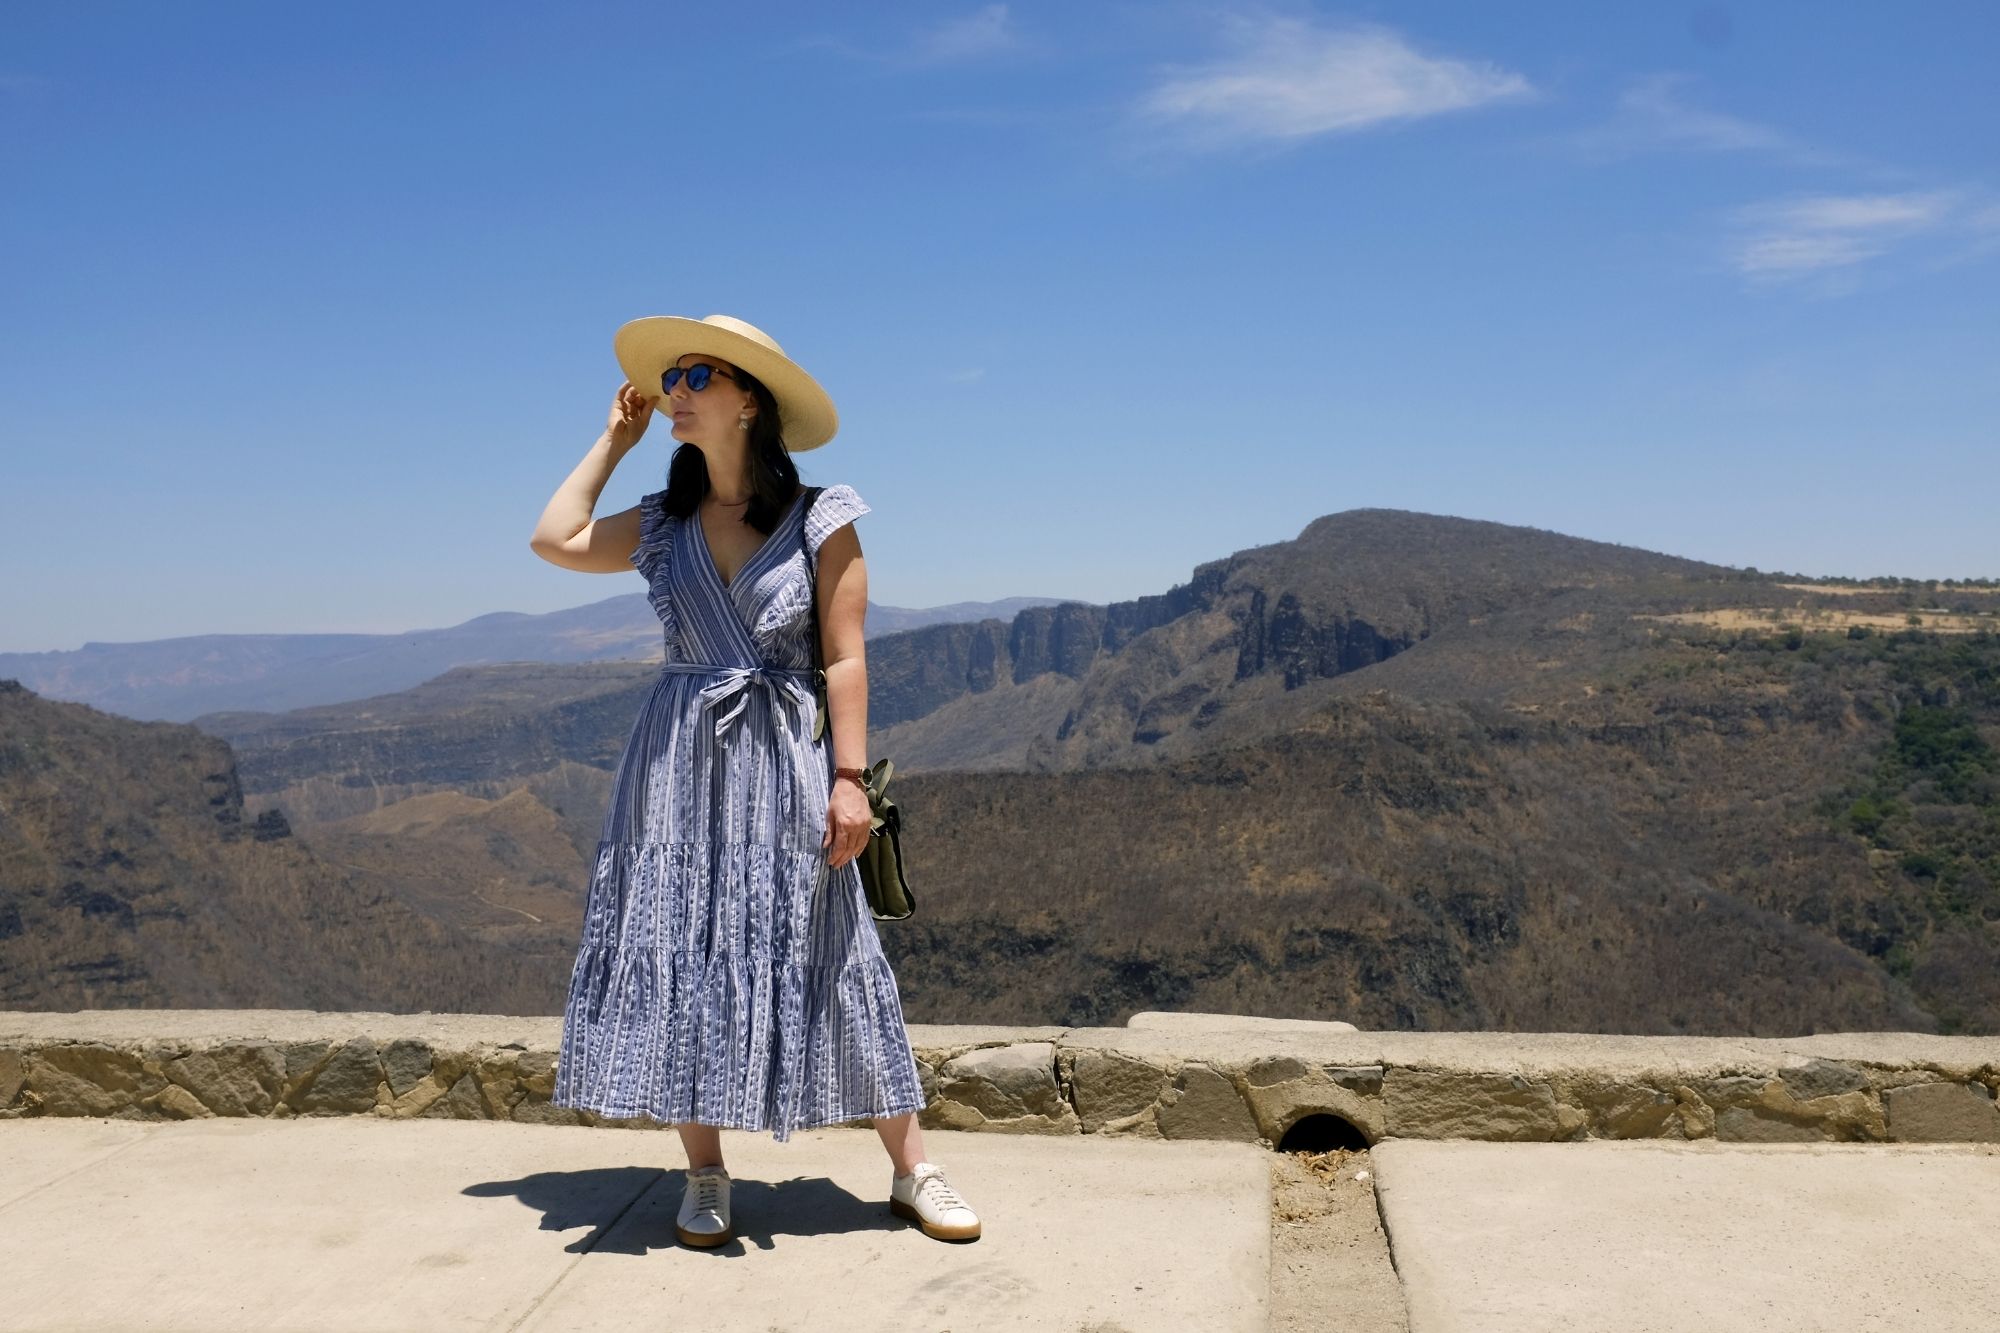 Alyssa looks to the right, she is standing in front of a canyon wearing a blue dress and a straw hat